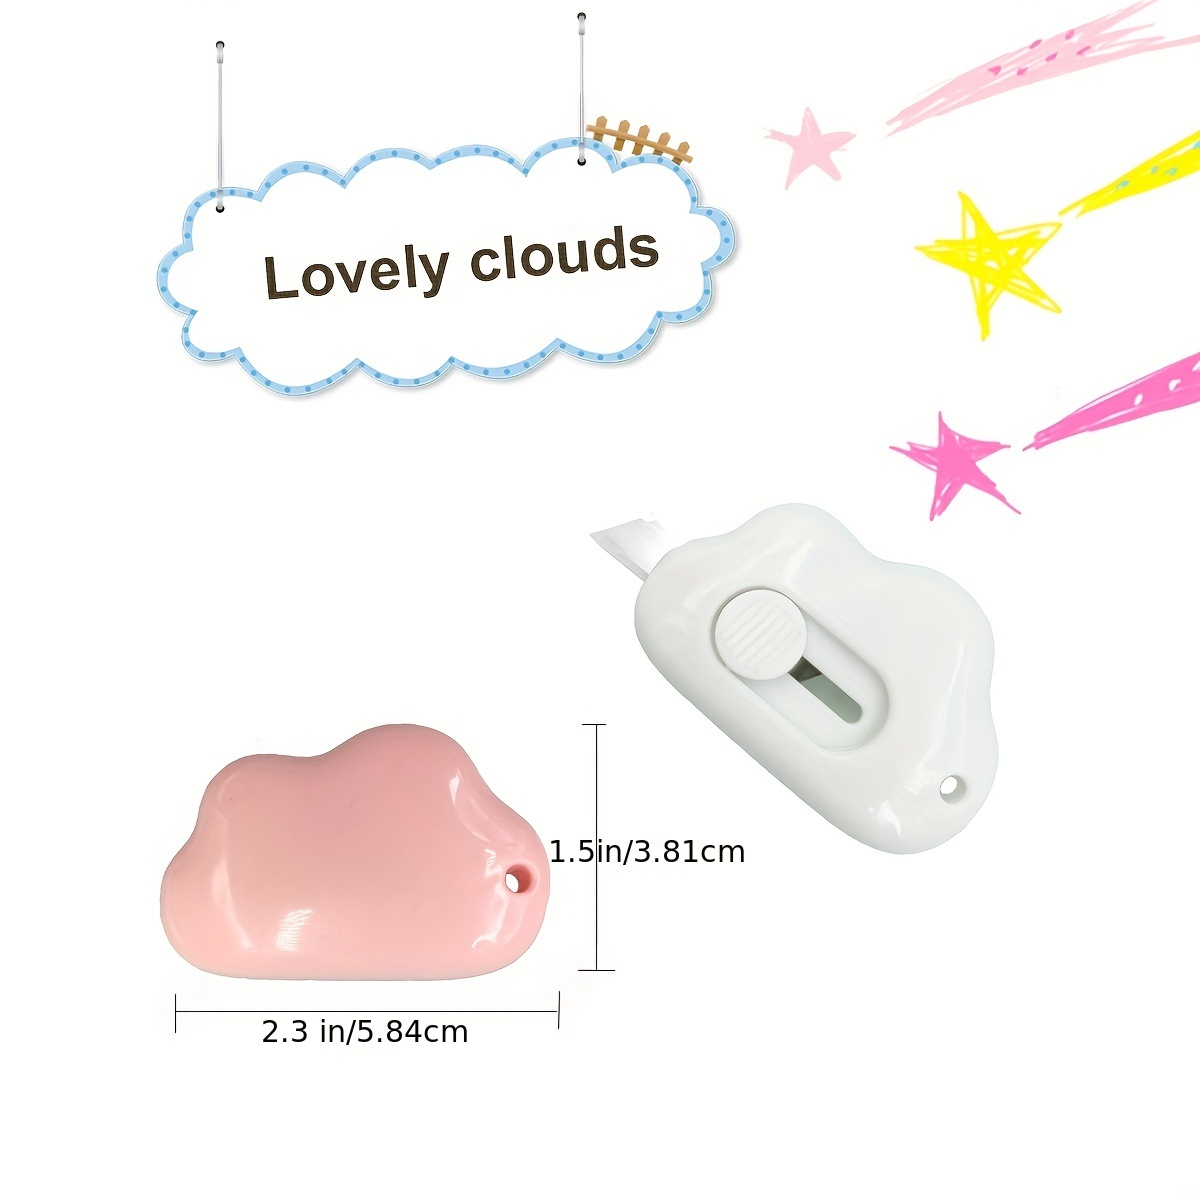 3pcs/set)Cute Cloud Color Mini Portable Utility Knife Paper Cutter Cutting  Paper Razor Blade Office Stationery (Blue,Pink,White